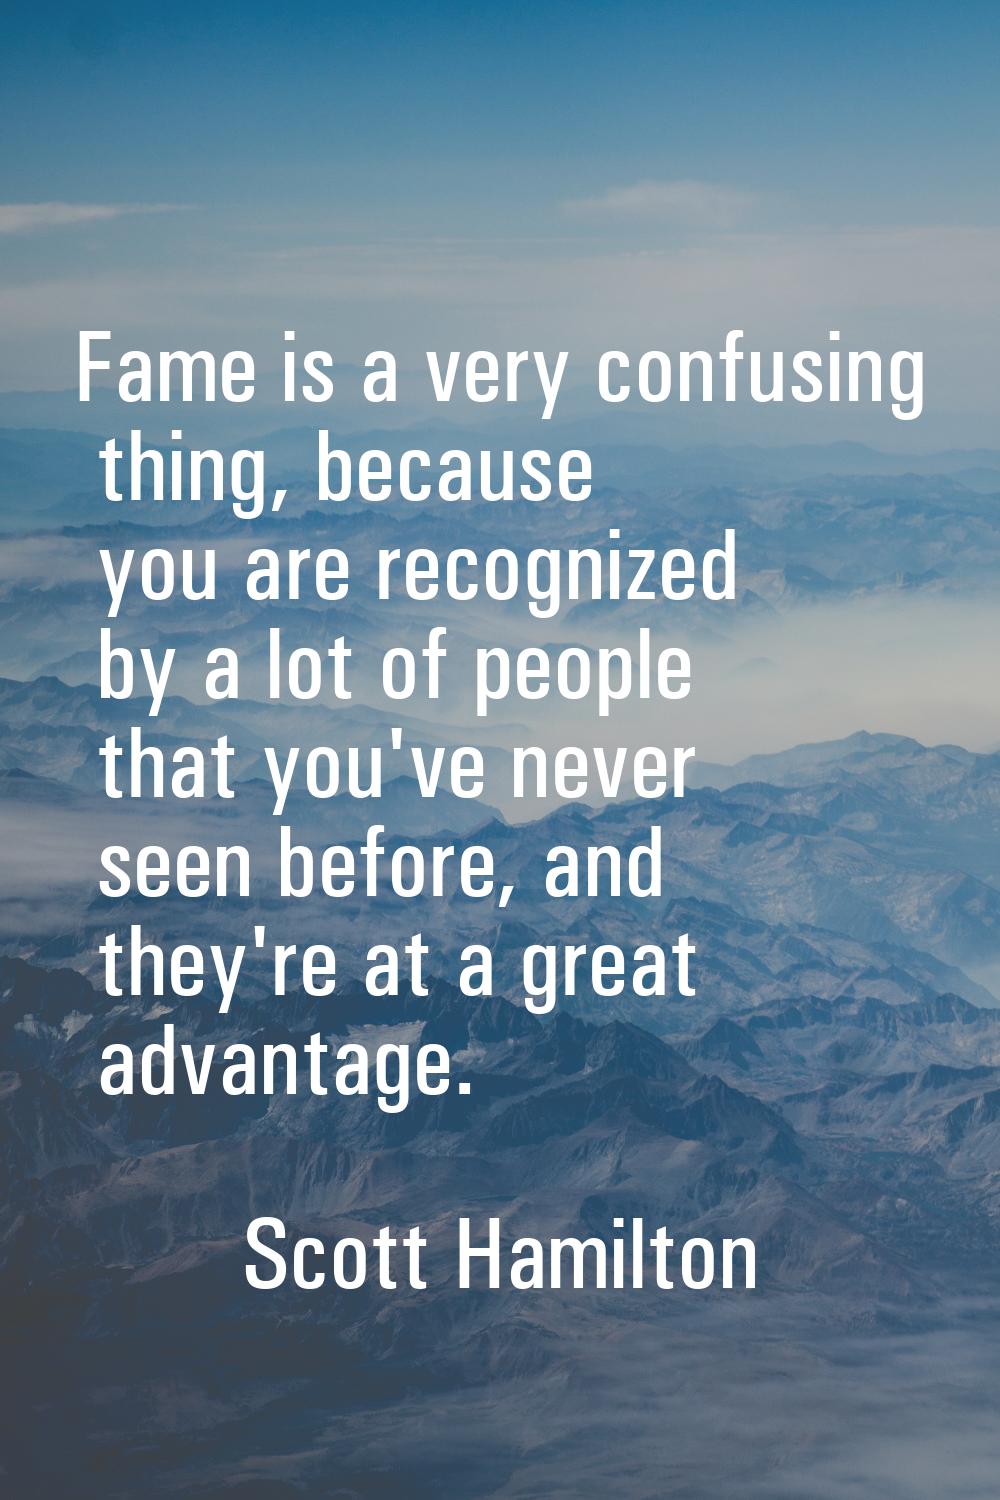 Fame is a very confusing thing, because you are recognized by a lot of people that you've never see